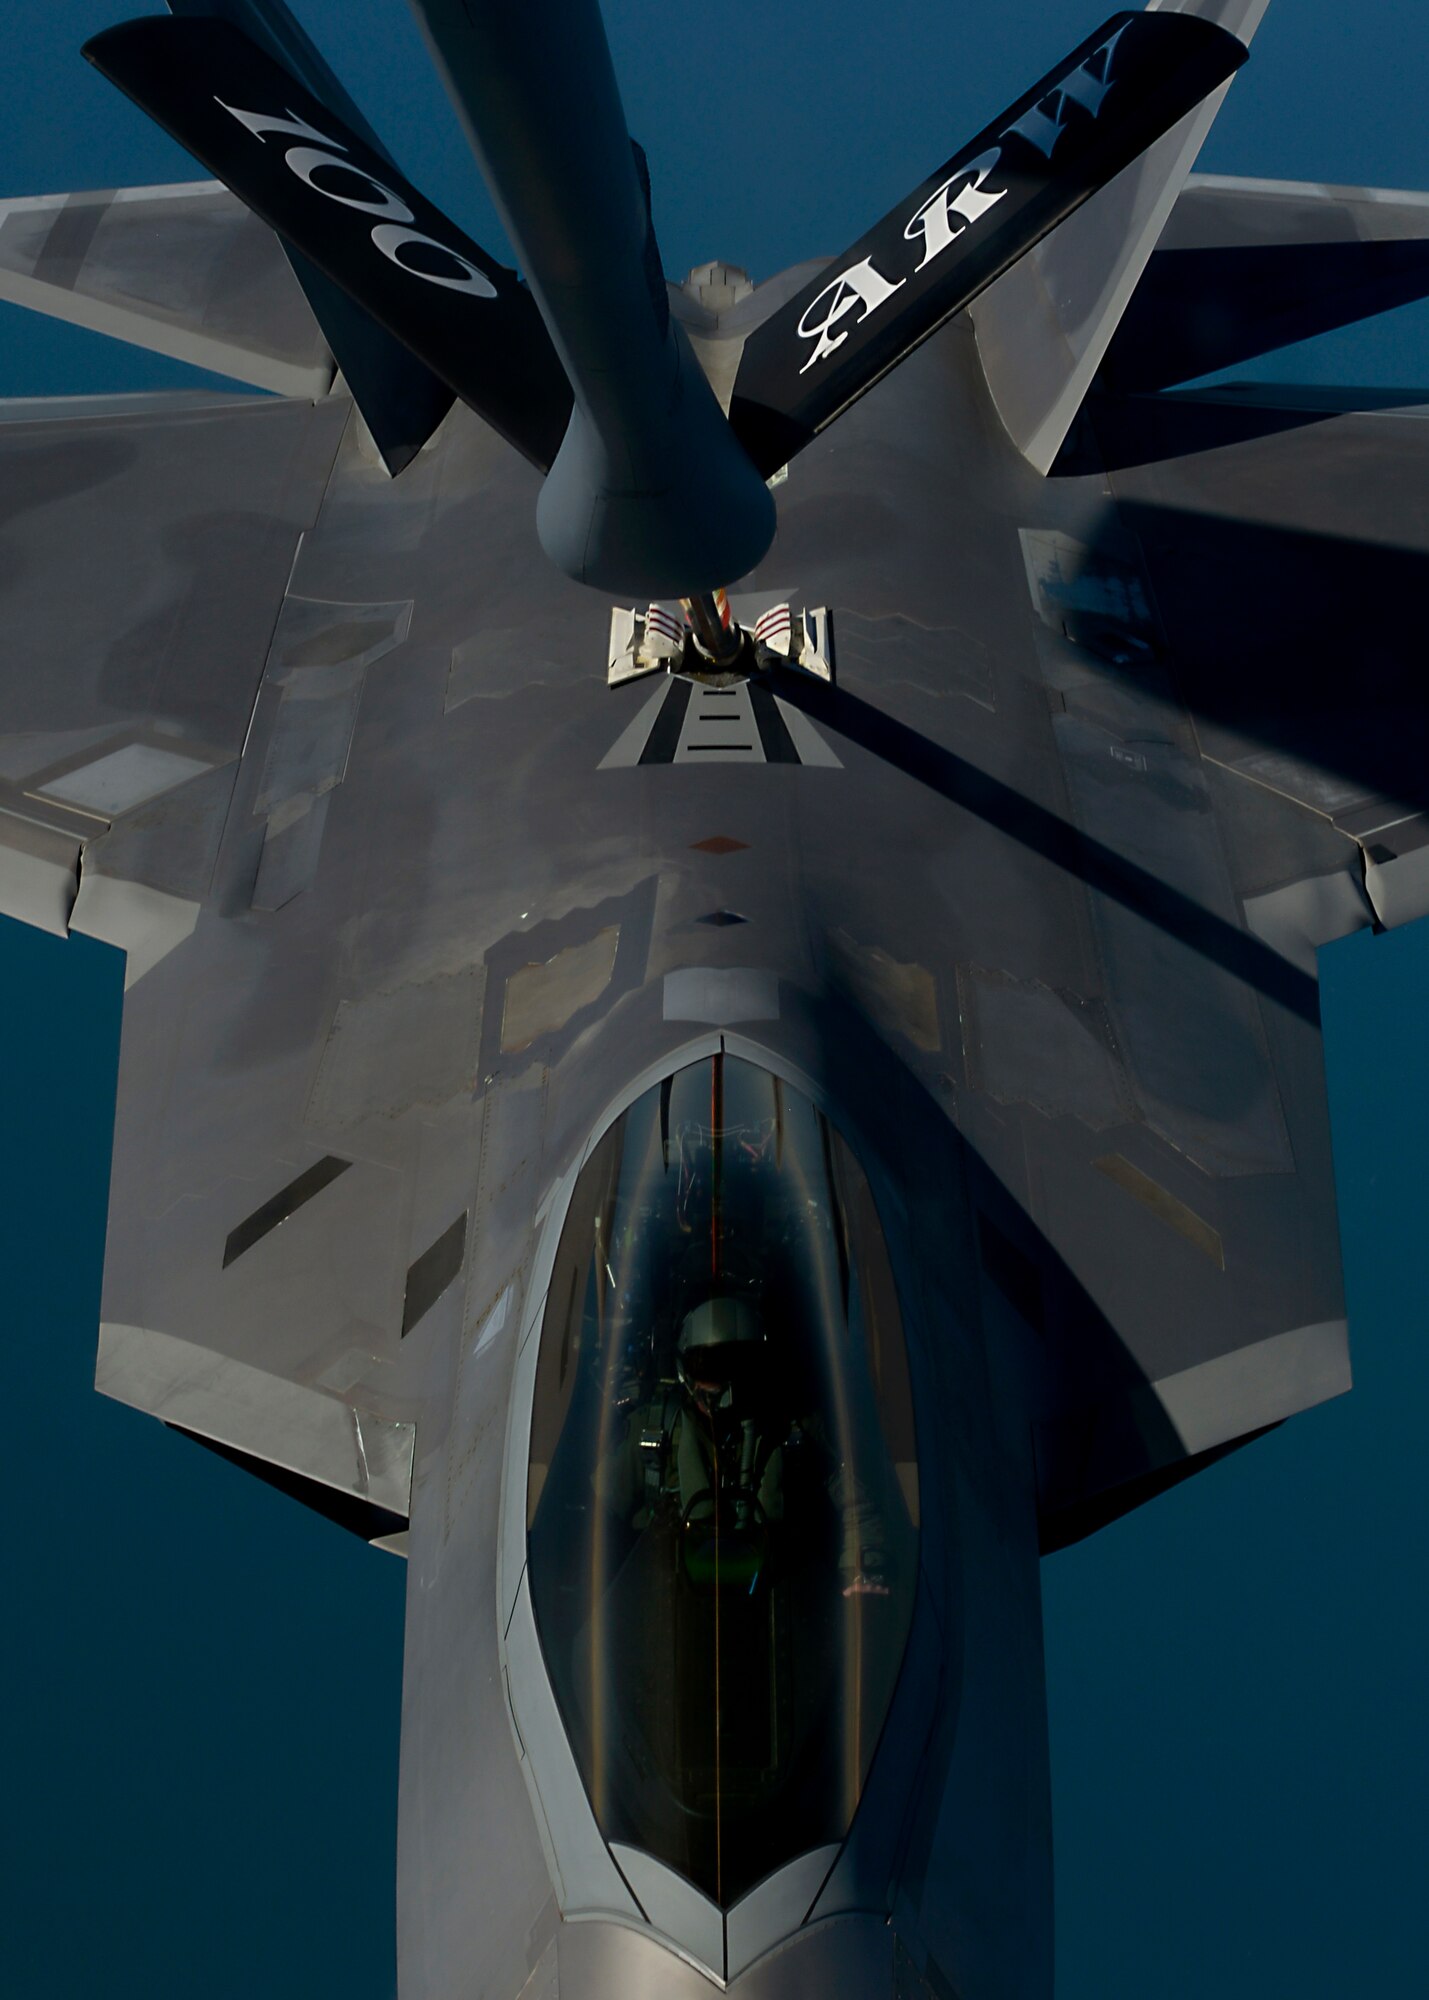 A U.S. Air Force KC-135 Stratotanker assigned to RAF Mildenhall, England, refuels an F-22 Raptor from the 95th Fighter Squadron at Tyndall Air Force Base, Fla., while participating in exercise Iron Hand April 19, 2016, over the Norfolk Sea. The F-22s conducted multiple air training exercises with 48th Fighter Wing F-15s assigned to RAF Lakenheath, as well as other U.S. and Royal Air Force aircraft throughout the exercise. (U.S. Air Force photo by Senior Airman Victoria H. Taylor/Released)